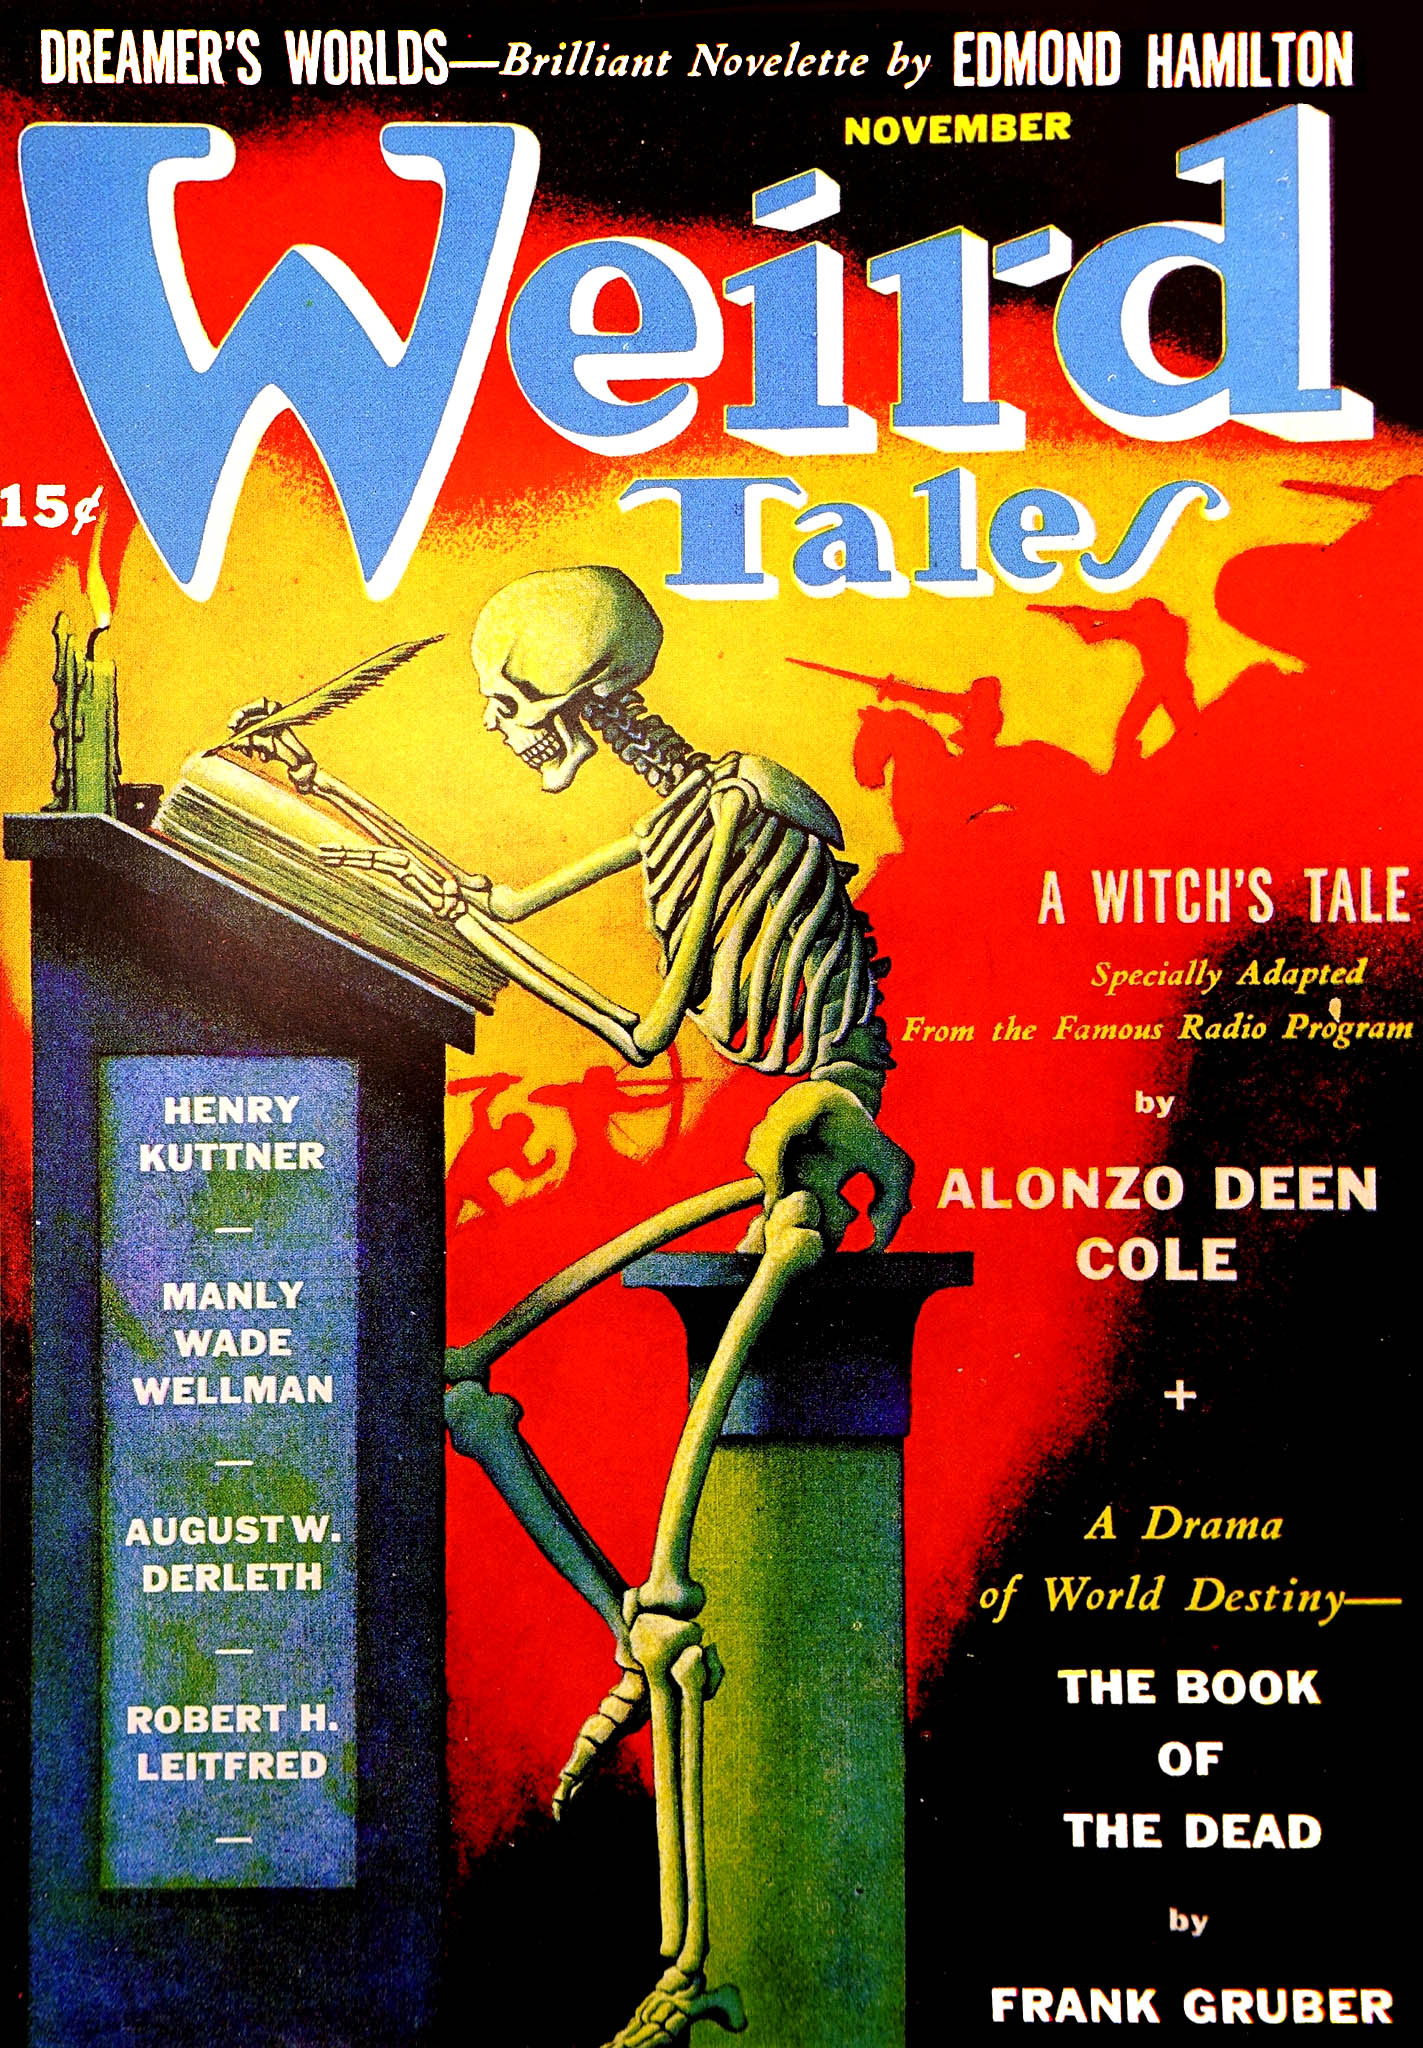 Painted cover of Weird Tales, dated November. The cover art features a skeleton sitting at a desk, writing in a book with a quill pen. The background shows a medieval battle scene in red-tinted silhouette. The captions read: (above the title) "DREAMER'S WORLDS—Brilliant Novelette by EDMOND HAMILTON" and (below the title) "50c; HENRY KUTTNER; MANLY WADE WELLMAN; AUGUST W. DERLETH; ROBERT H. LEITFRED; A WITCH'S TALE — Specially Adapted From the Famous Radio Program by ALONZO DEEN COLE; A Drama of World Destiny — THE BOOK THE DEAD by FRANK GRUBER."